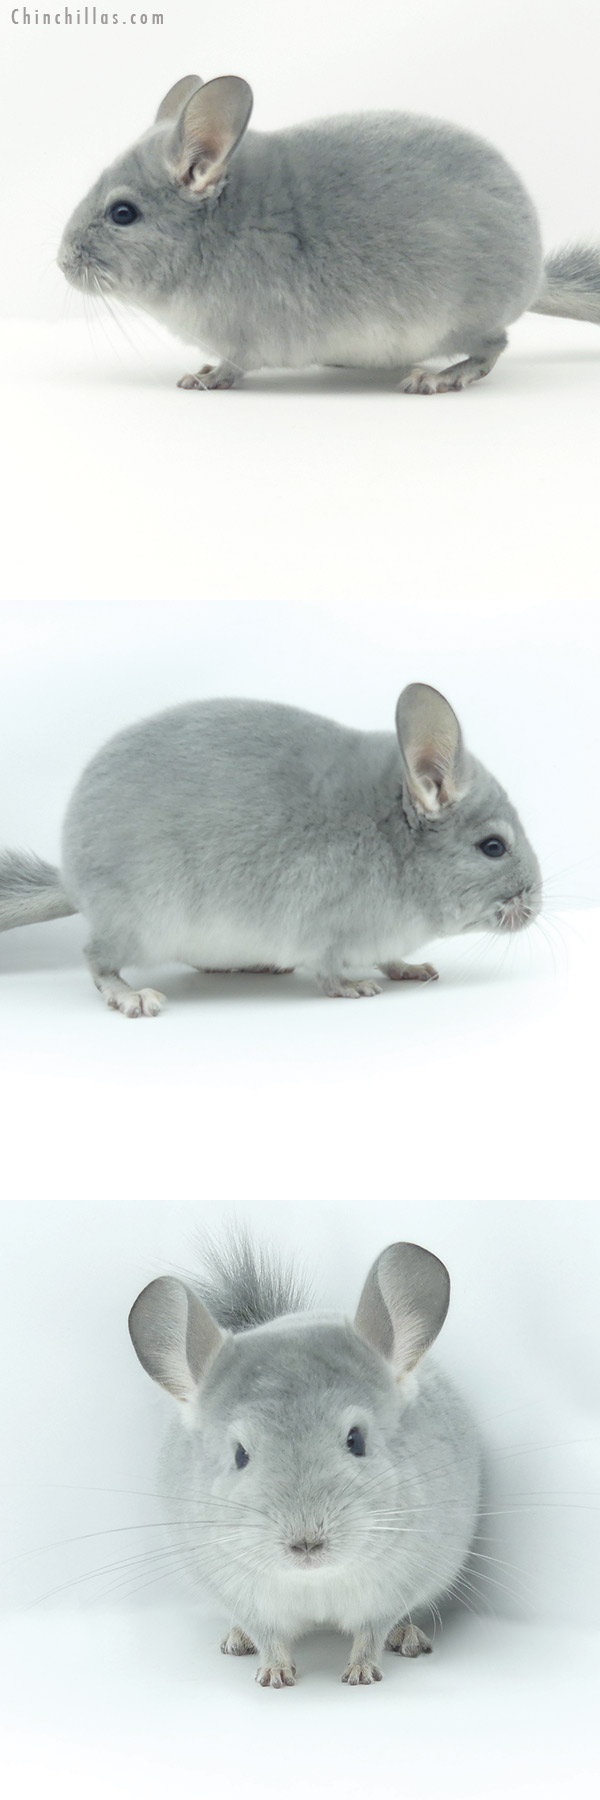 Chinchilla or related item offered for sale or export on Chinchillas.com - 19366 Show Quality Blue Diamond Male Chinchilla